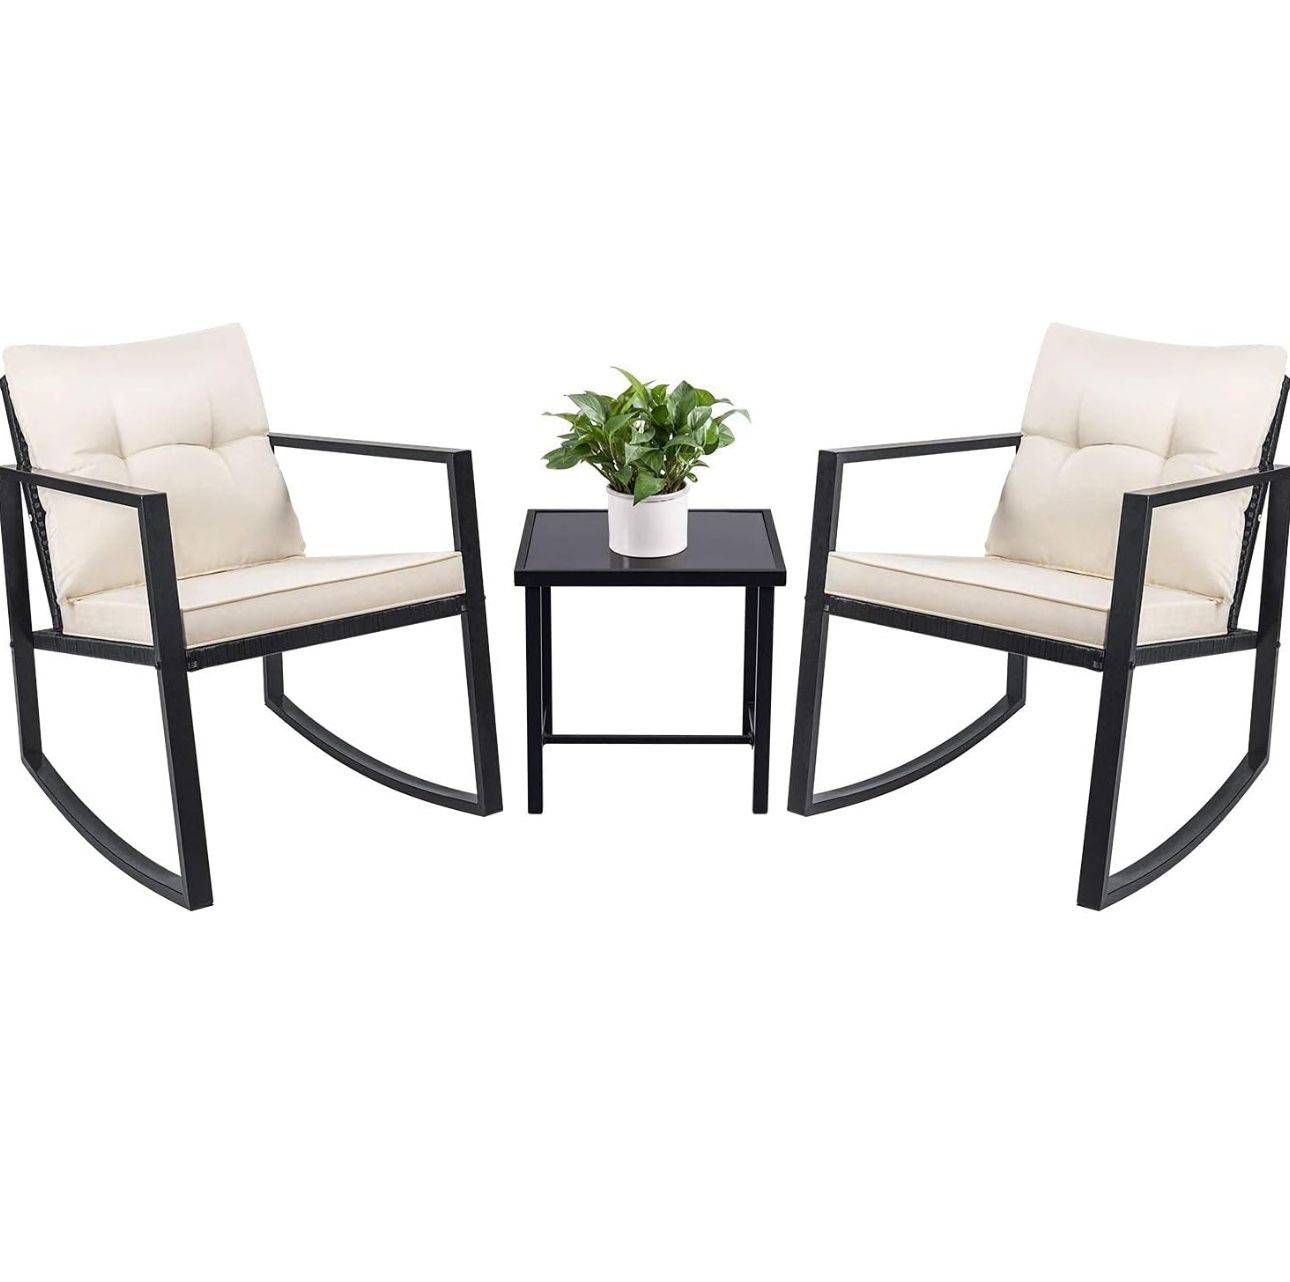 Outdoor Rocking Chairs And Glass Top Table Free Shipping Or Local Pickup In Savannah 